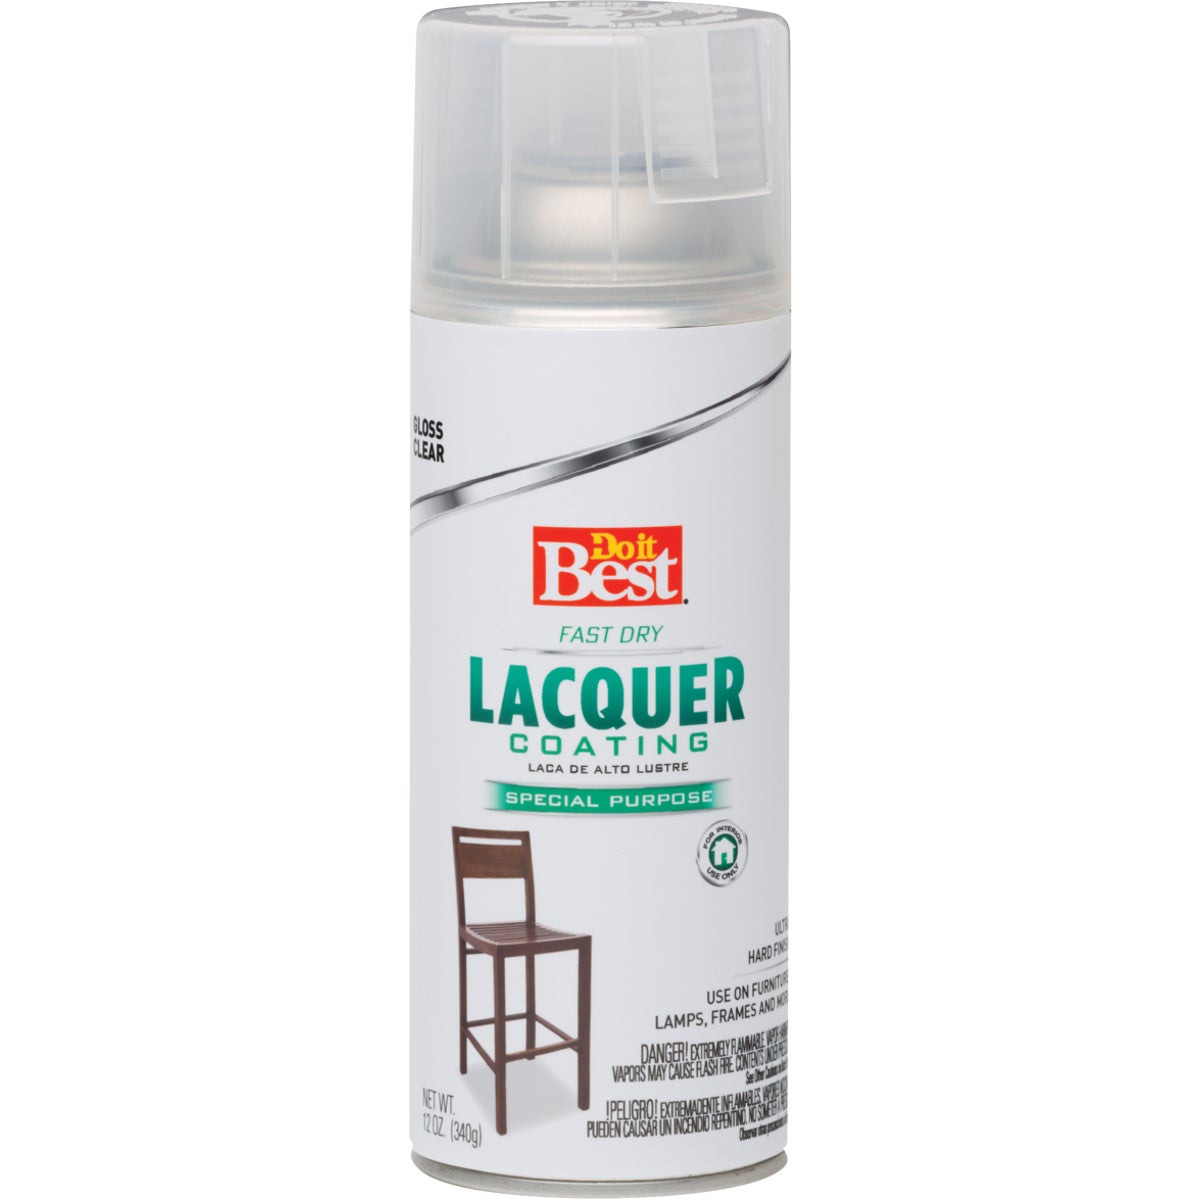 Item 781540, Fast-drying acrylic lacquer formula provides a super hard, high-gloss 